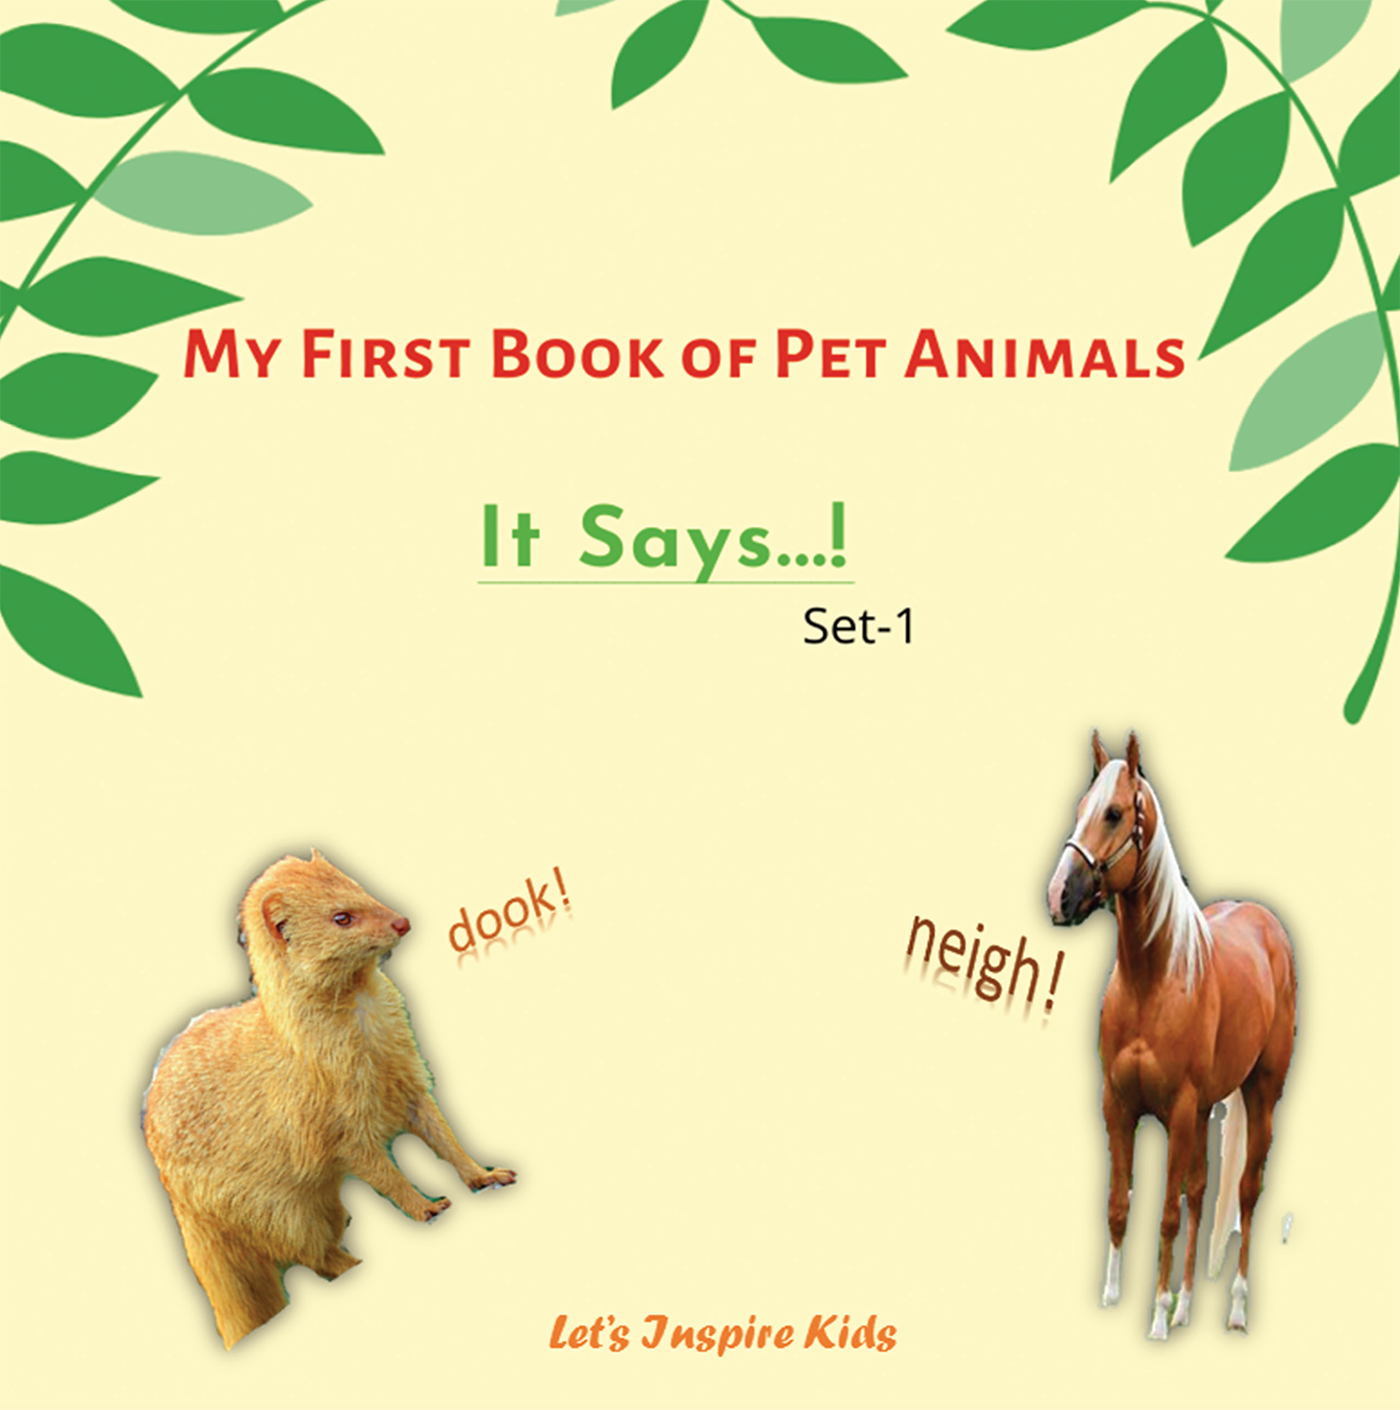 My First Book of Pet Animals